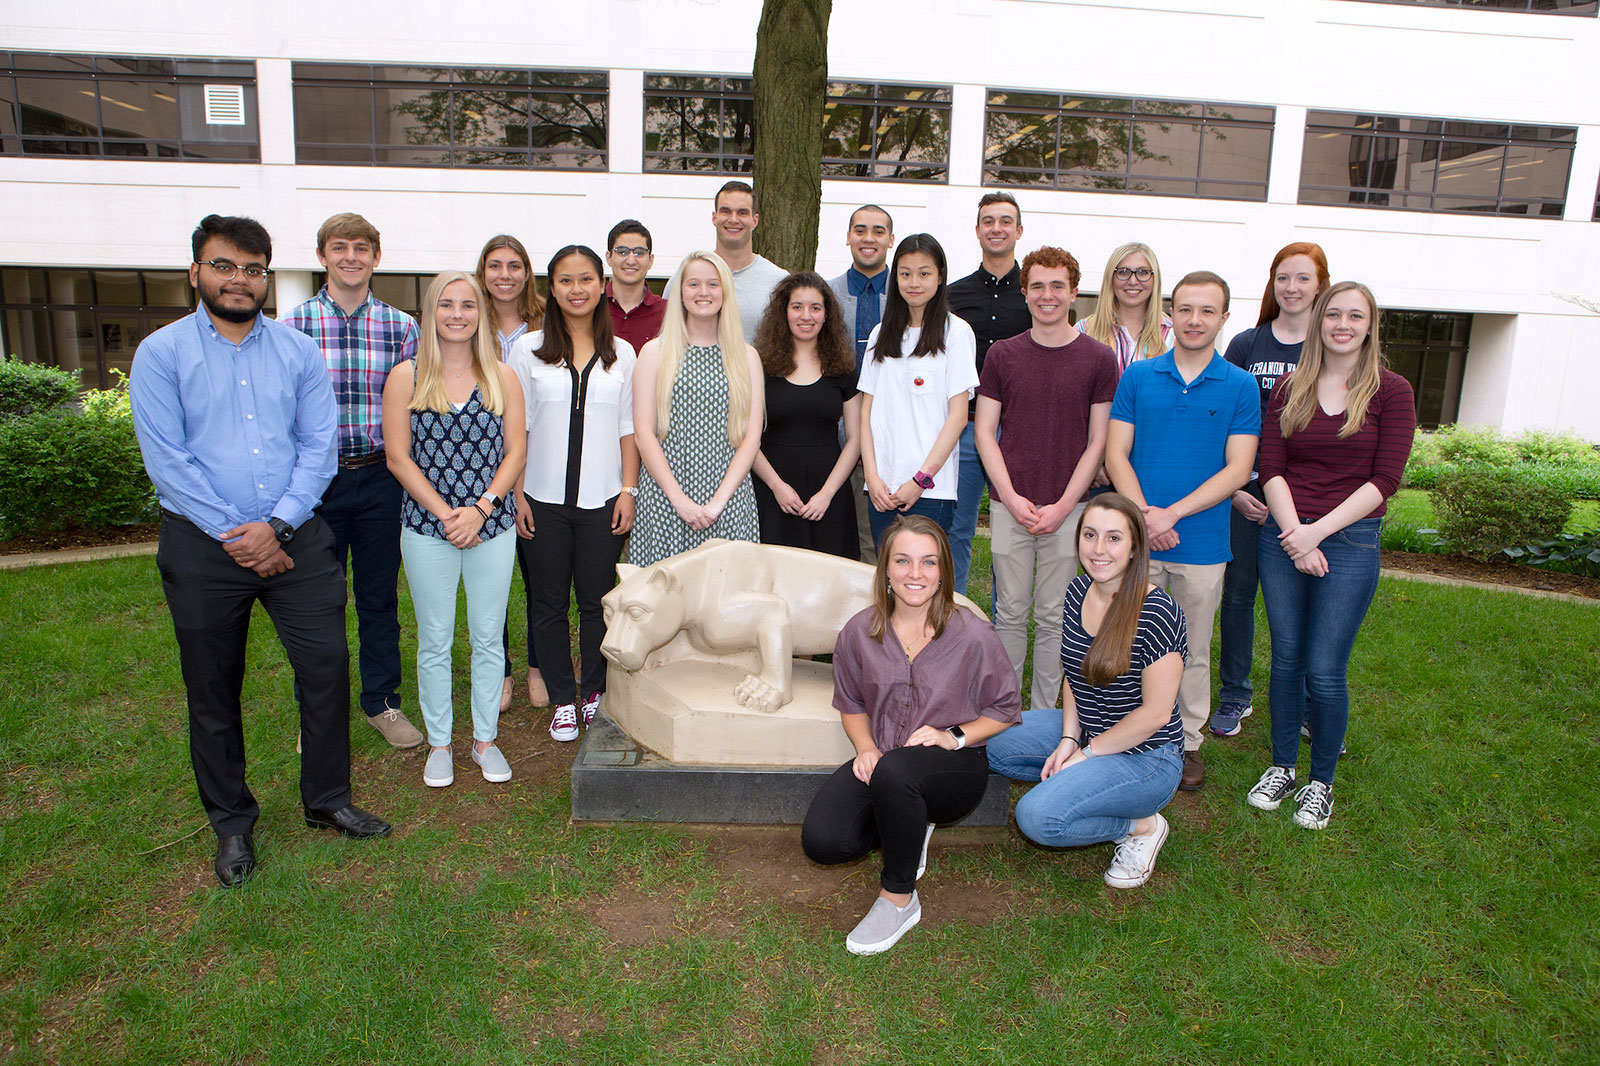 Student participants in the Summer Undergraduate Research Internship Program, or SURIP, at Penn State College of Medicine are seen in 2018. The large group of students is pictured standing in a courtyard at the College of Medicine, with trees, grass and a white building in the background and a statute of the Penn State Nittany Lion mascot in front of them.